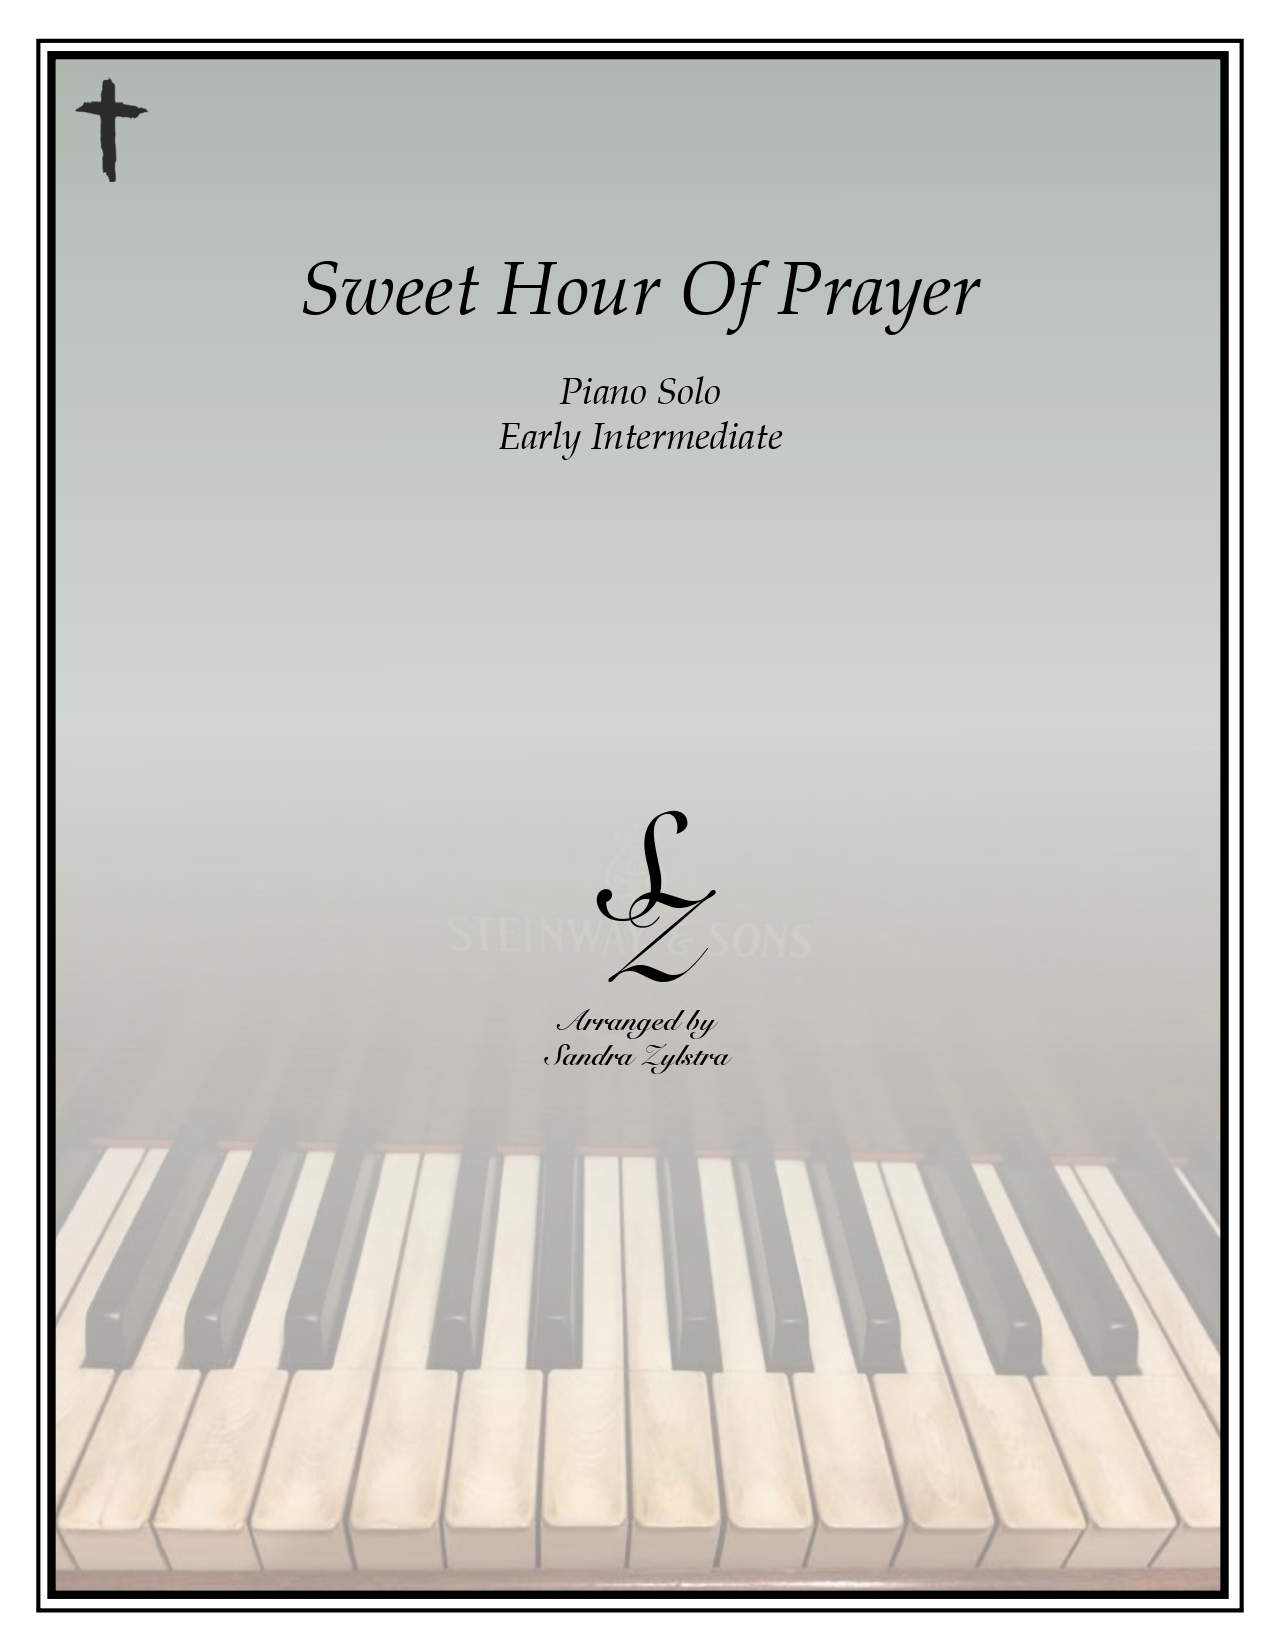 Sweet Hour Of Prayer early intermediate piano cover page 00011